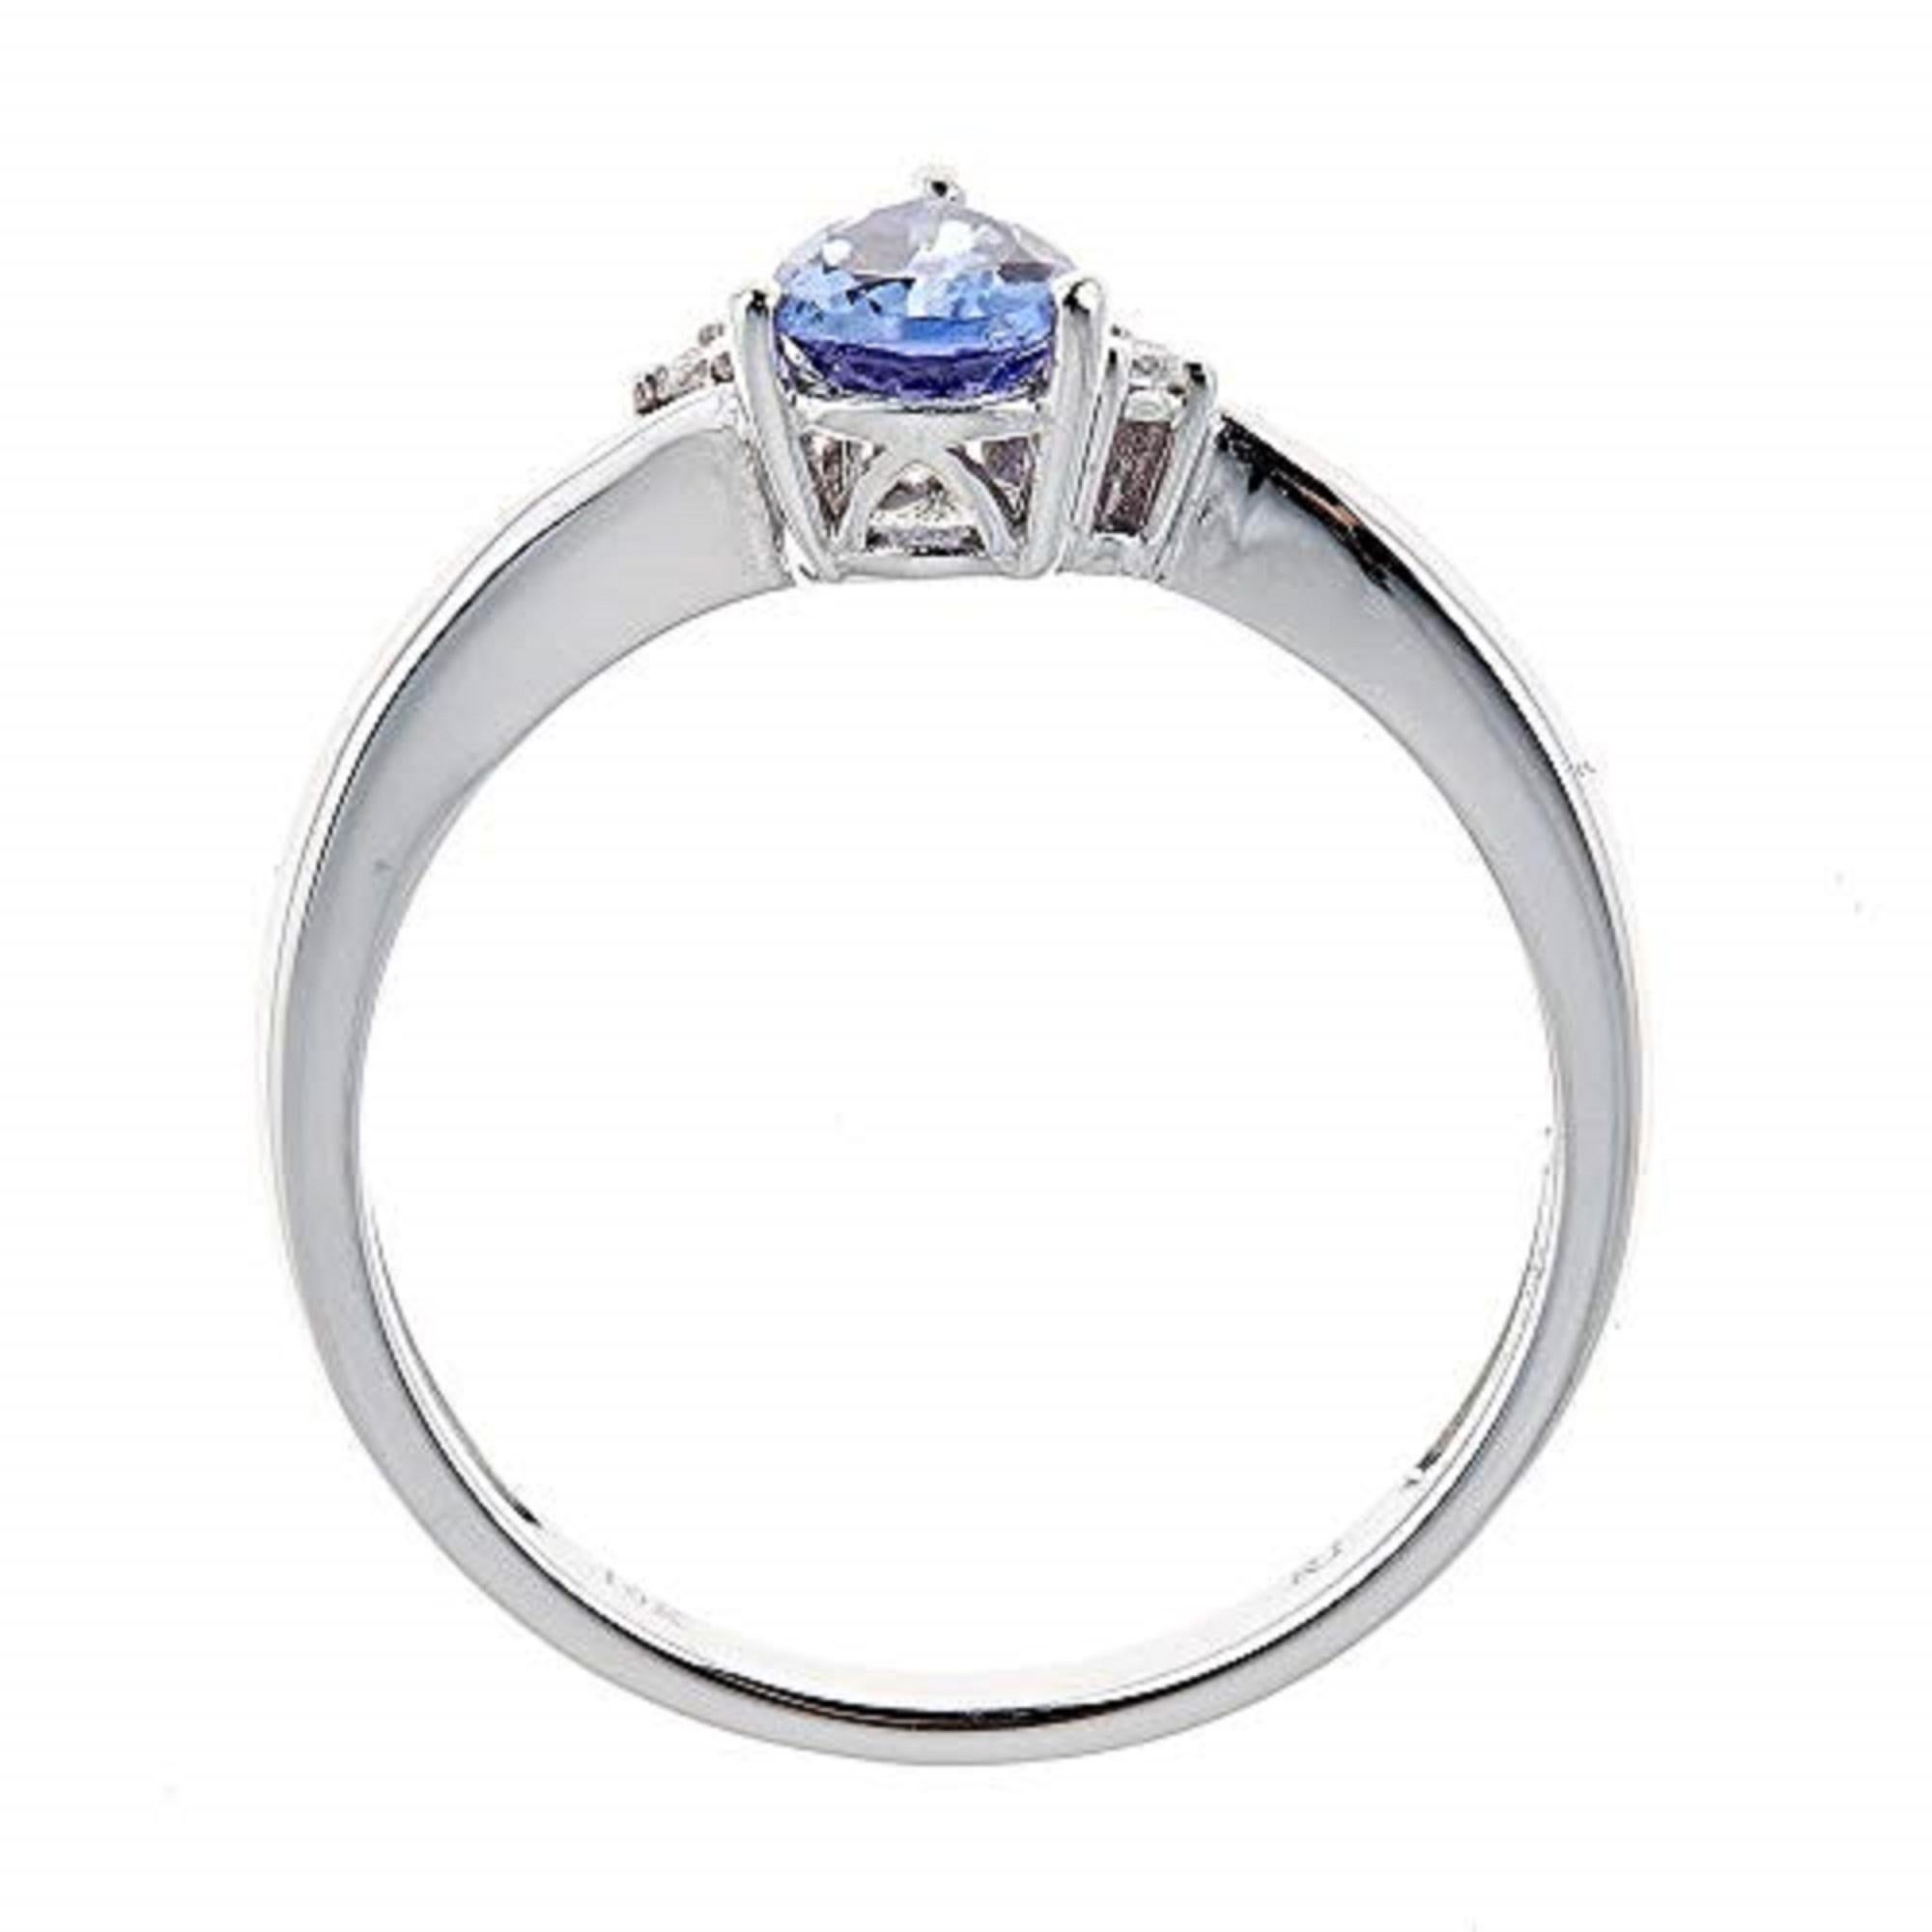 Stunning, timeless and classy eternity Unique Ring. Decorate yourself in luxury with this Gin & Grace Ring. This Ring is made up of Pear-Cut Prong Setting Blue Natuaral Tanzanite (1 pc) 0.91 Carat and Round-Cut Prong Setting White Diamond (2 pcs)